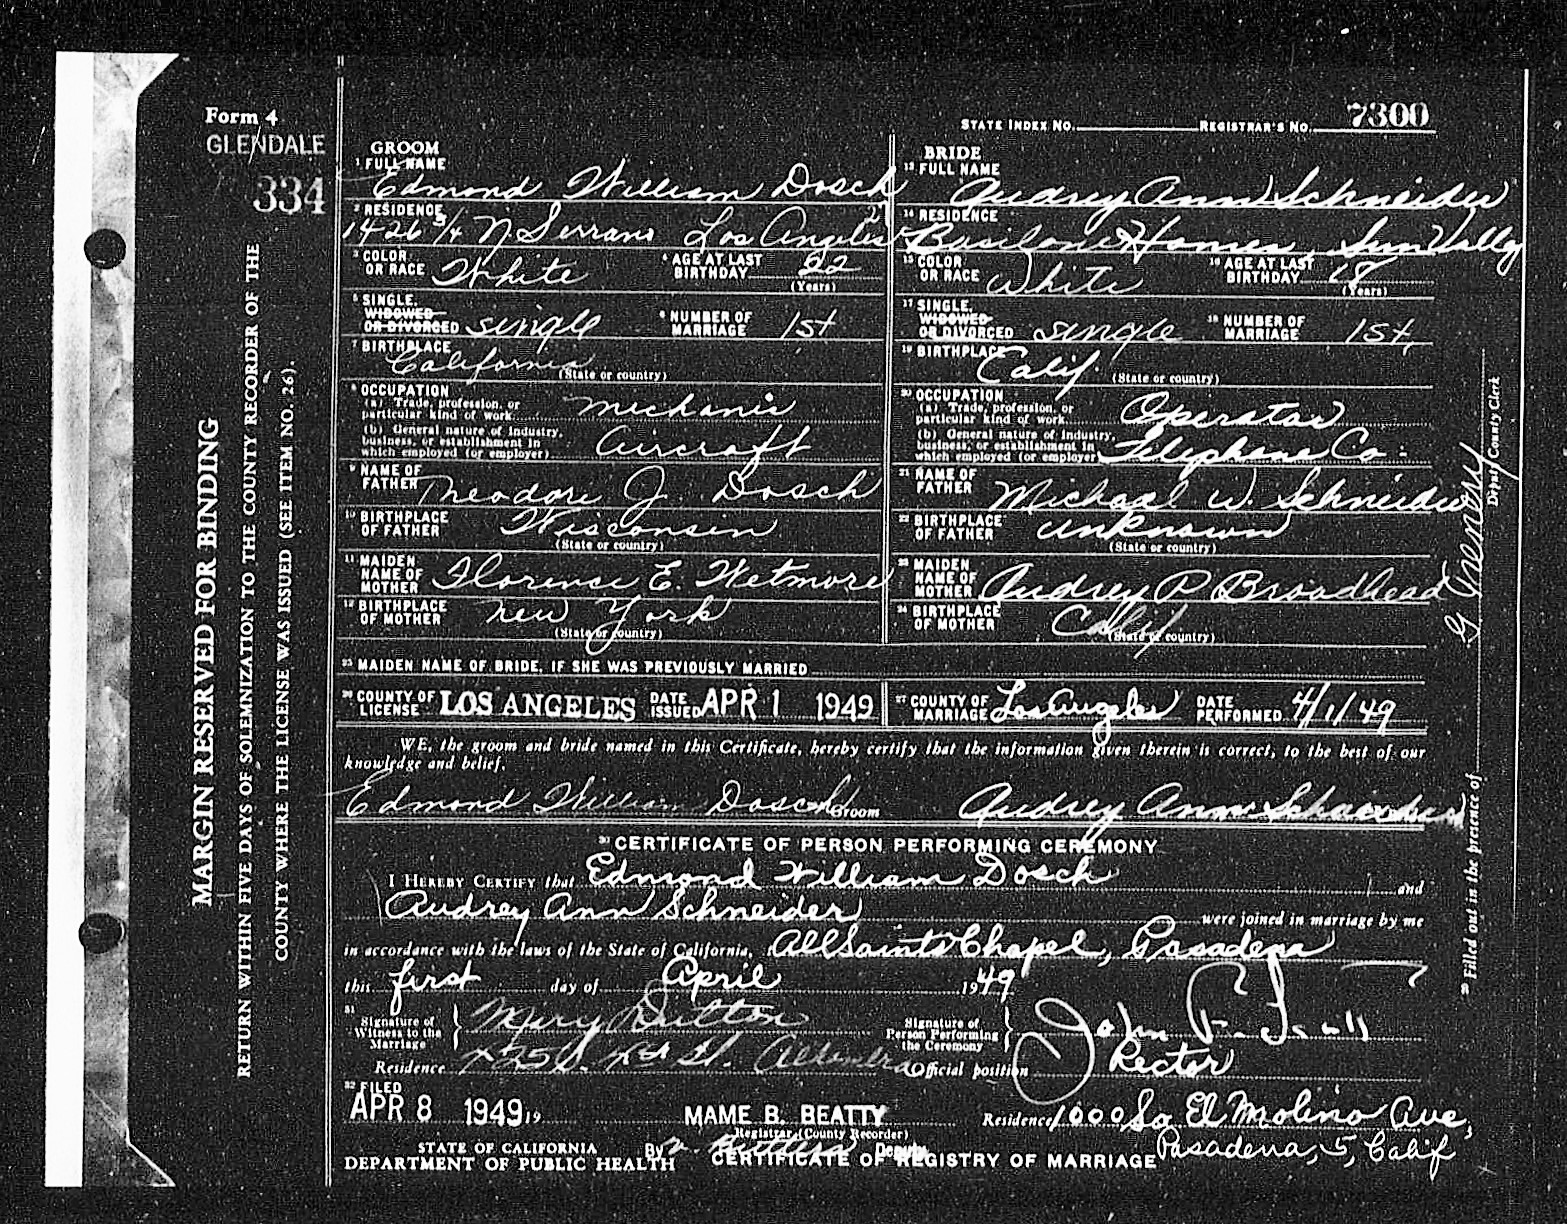  Certificate of Marriage for Audrey Ann Schneider (note spelling; not Snyder) and Edmond William Dosch  At the time of their marriage, Ann, 18, appears to be living in San Fernando Valley in military housing (see photo below) and was employed as a te